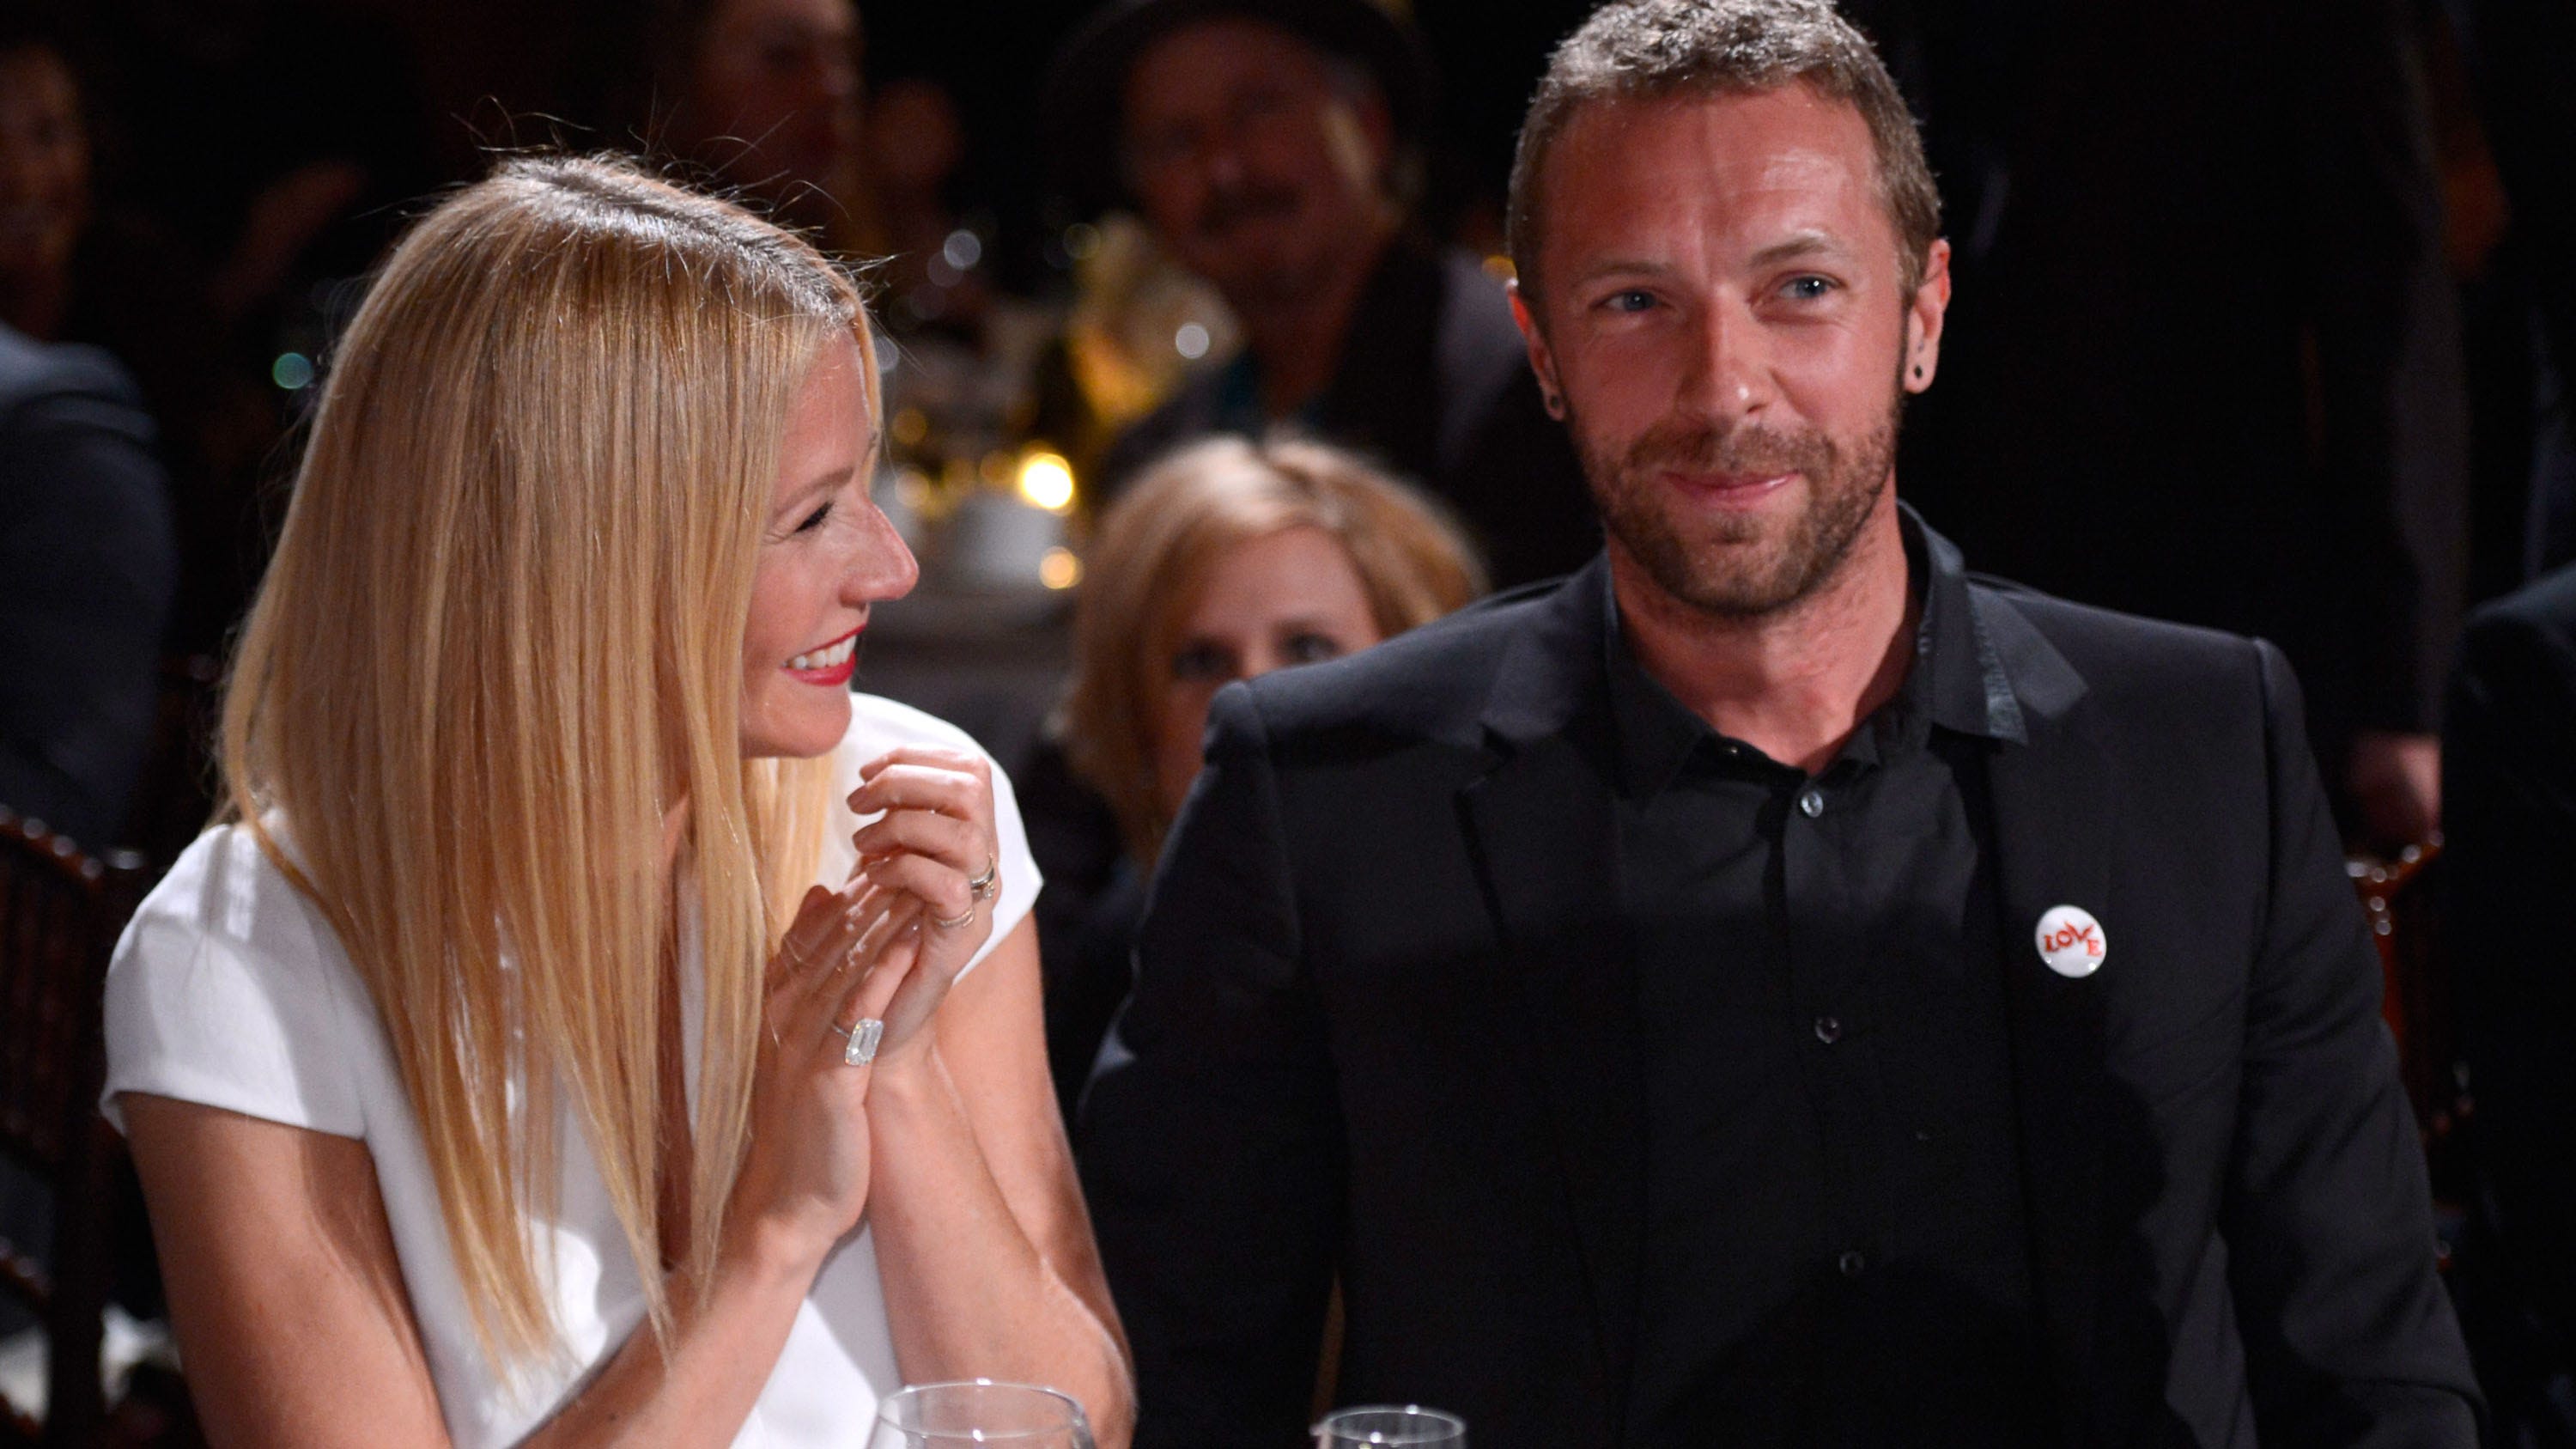 Gwyneth Paltrow reflects on Chris Martin’s split: ‘I never wanted to divorce’